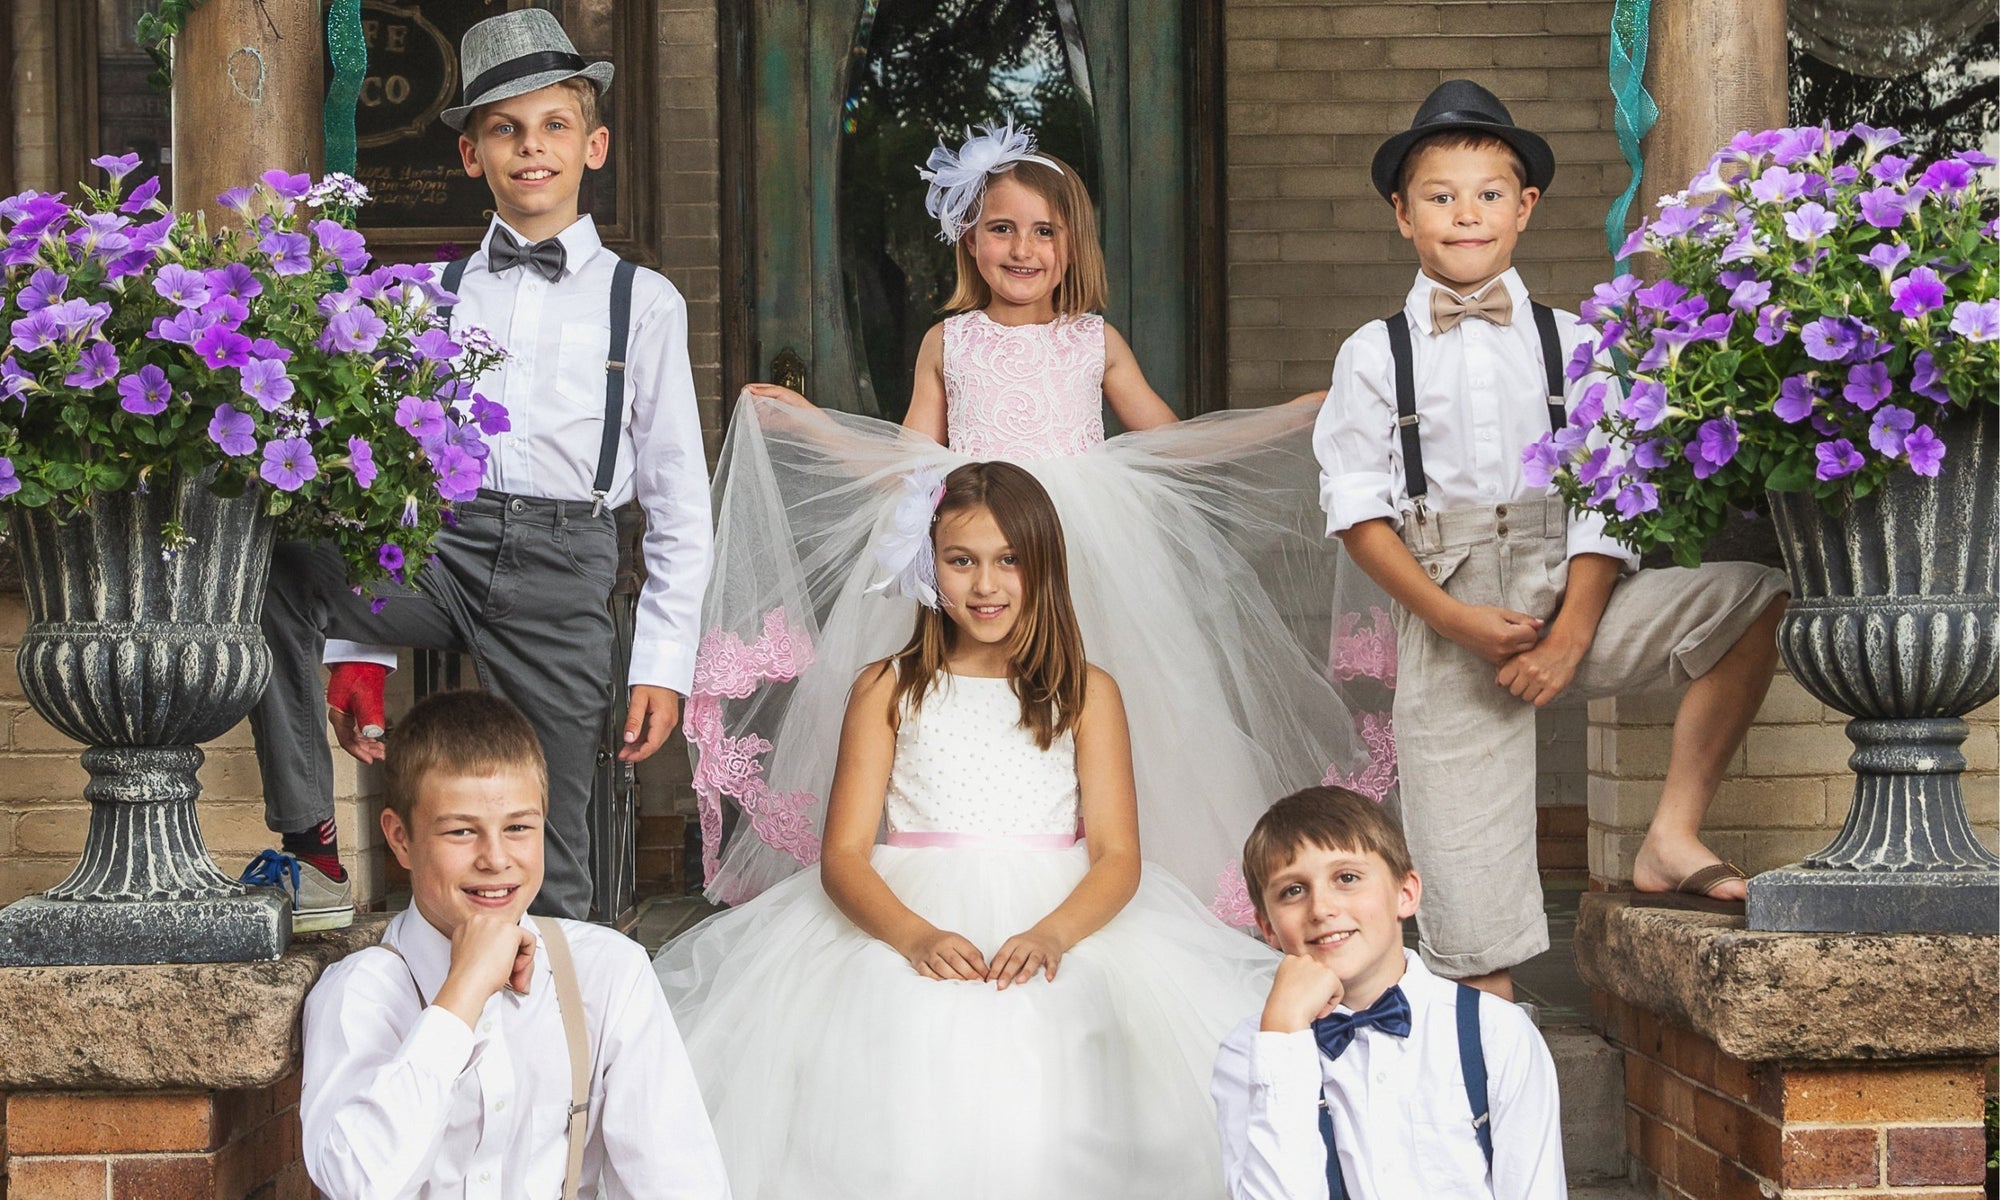 Ring Bearer 101: How to Pick One and their Duties